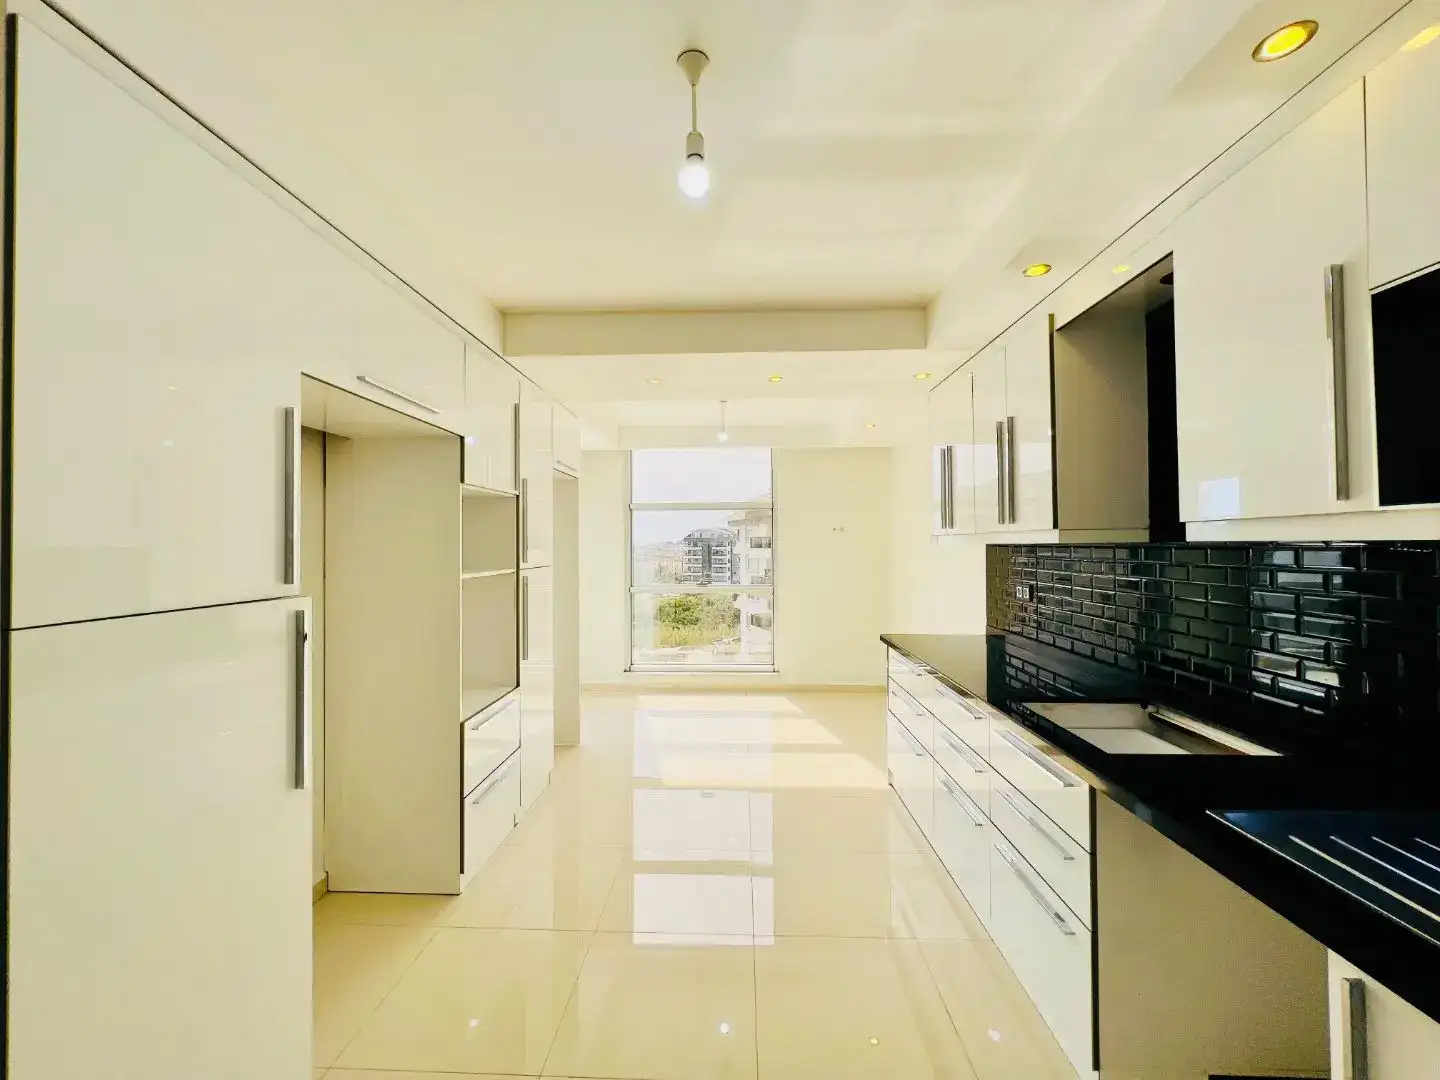 3+1 FLAT FOR SALE İN THE CENTER OF ALANYA